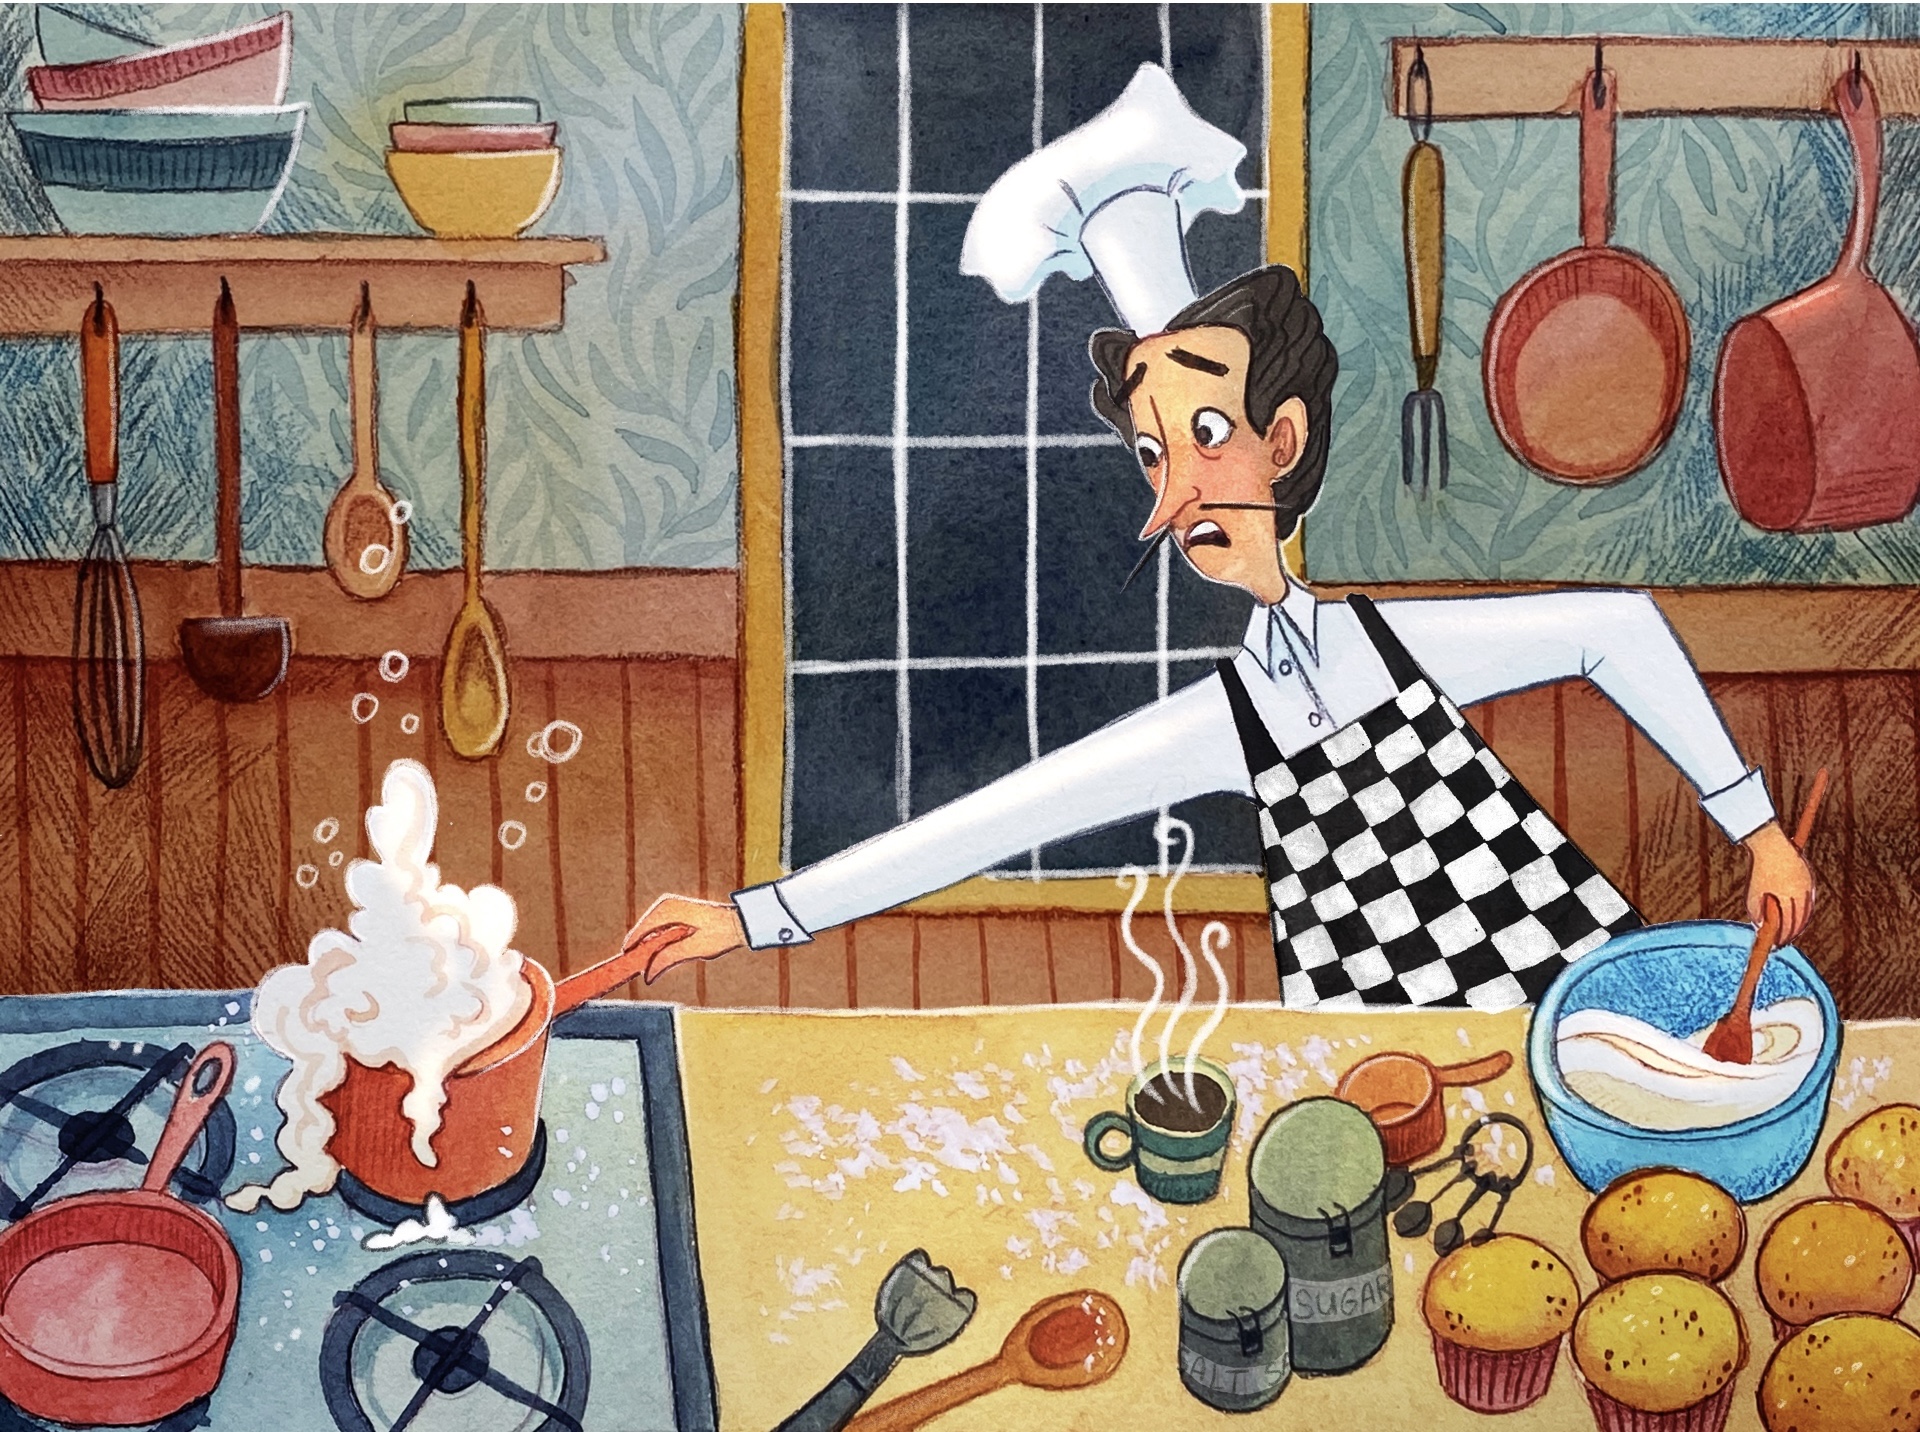 Whimsical watercolor and colored pencil illustration of a stressed out chef trying to do too many things at once. With one hand he mixes a bowl of frosting for some cupcakes, and with the other hand he's grabbing the handle of a pot that's boiling over on the stove. Behind him is a dark window, pots and spoons hanging on the wall, and a shelf with mixing bowls stacked on top of it.